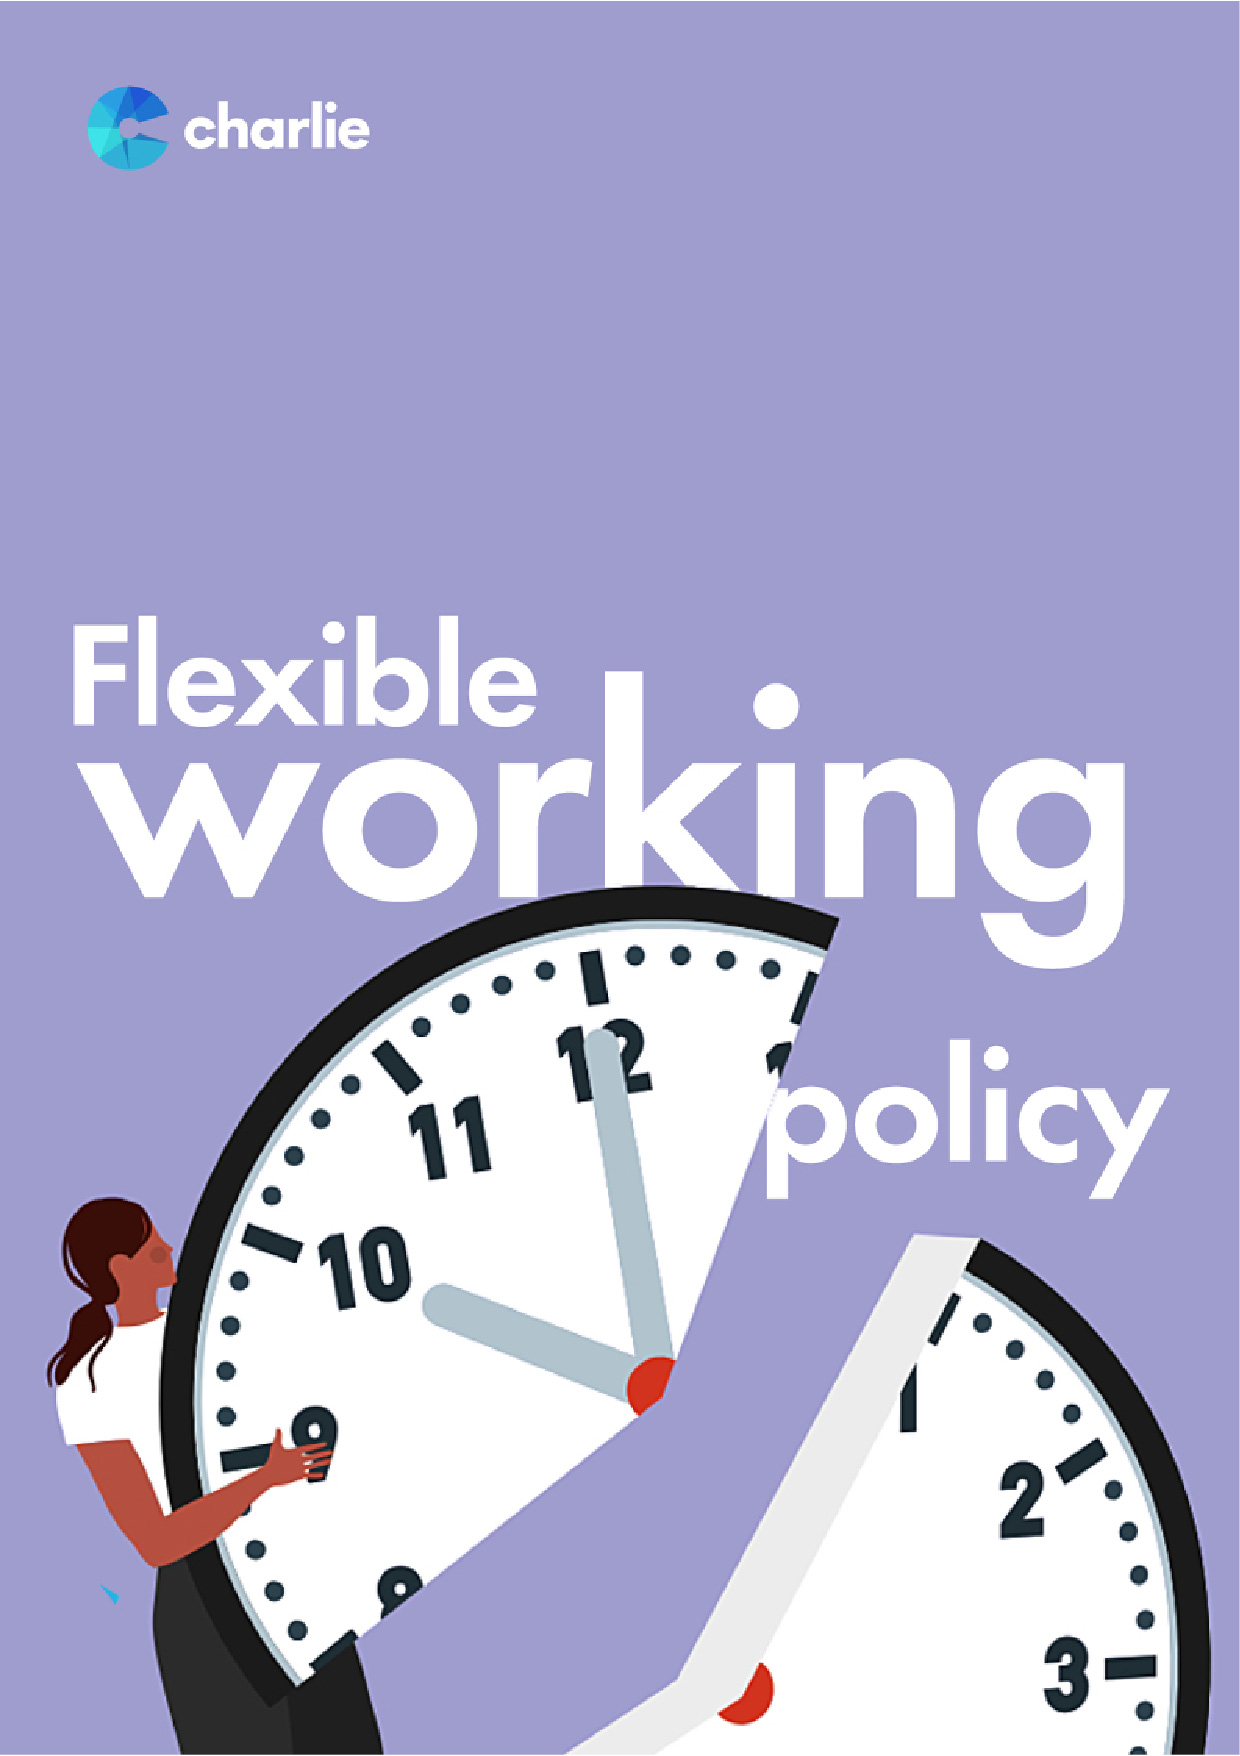 Flexible working policy